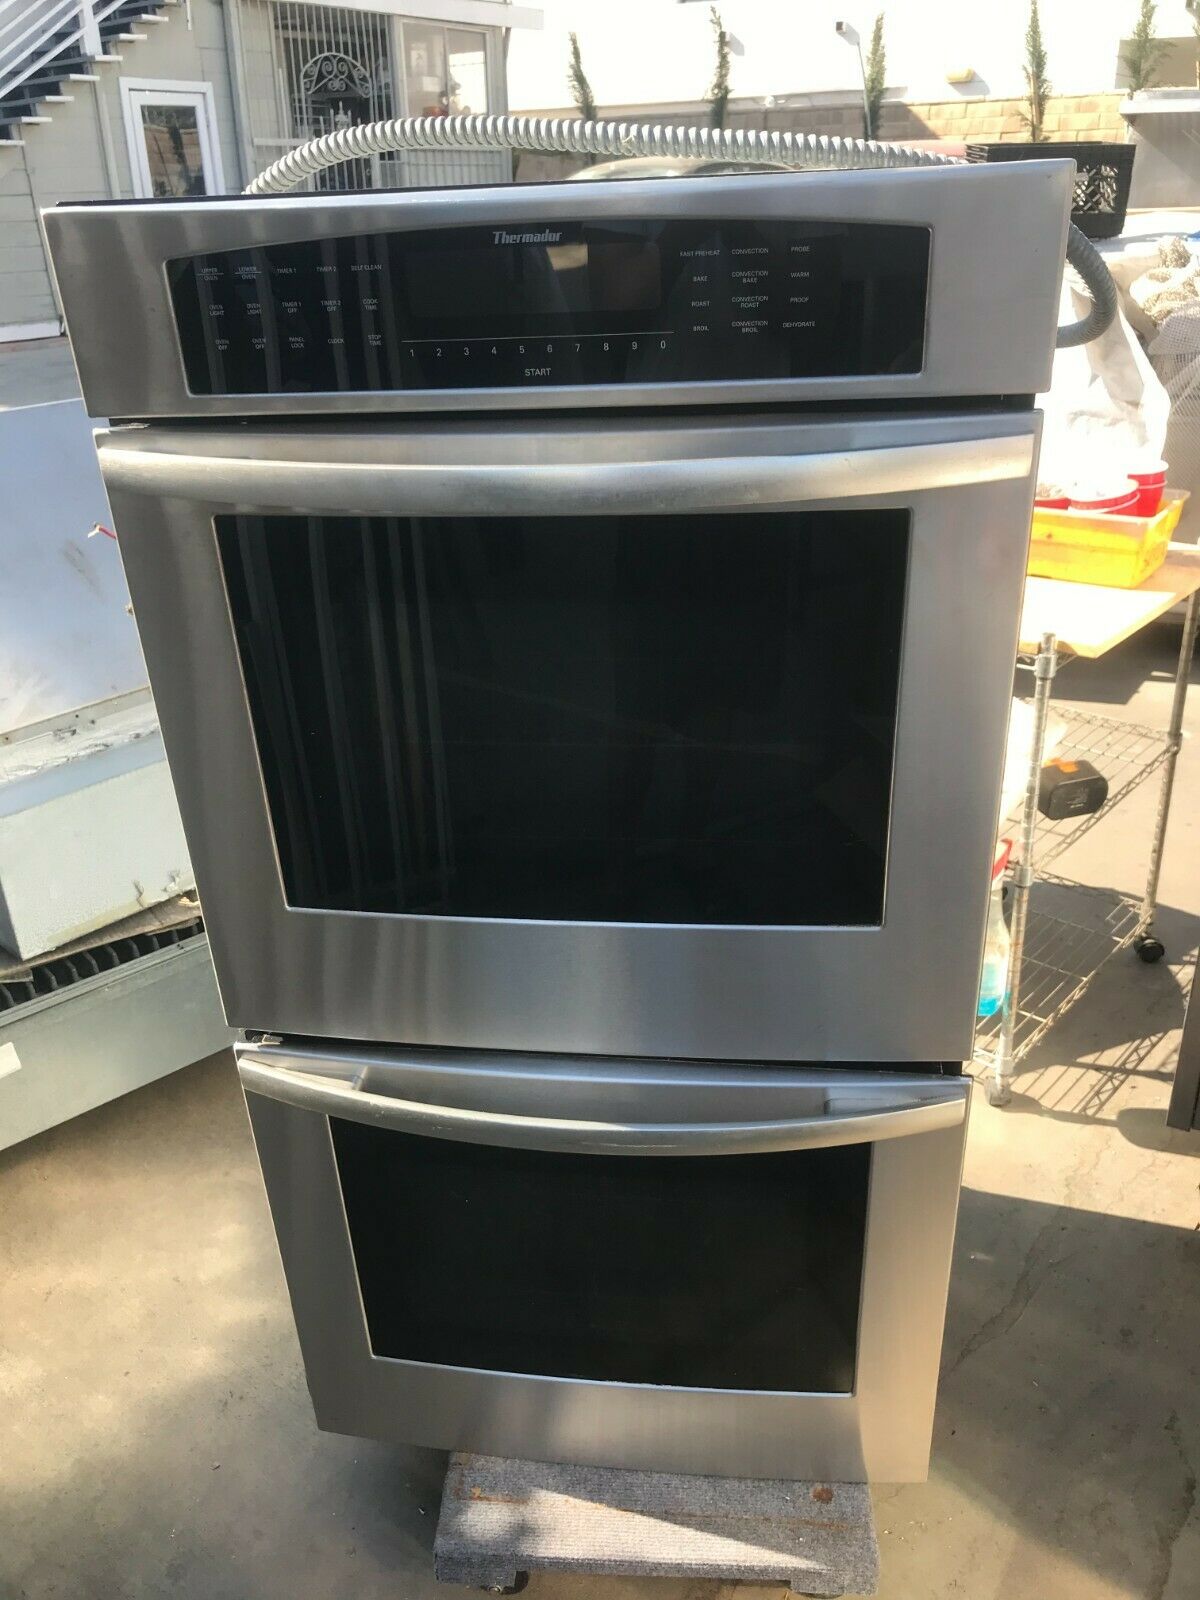 Thermador 27" Double Oven, C272bs  In La